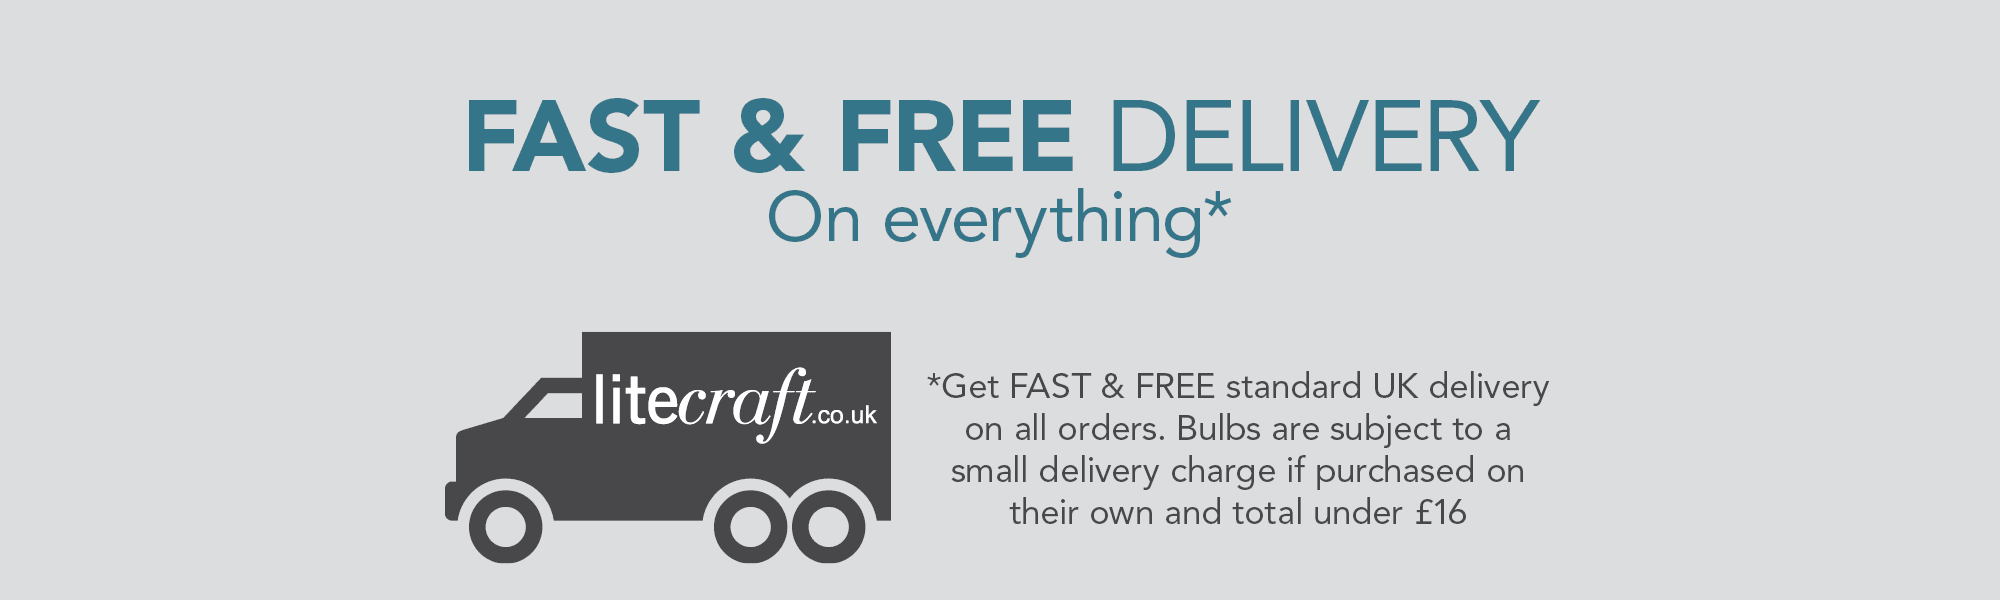 FAST & FREE Standard UK Delivery on All Items. Excluding Bulbs under £16